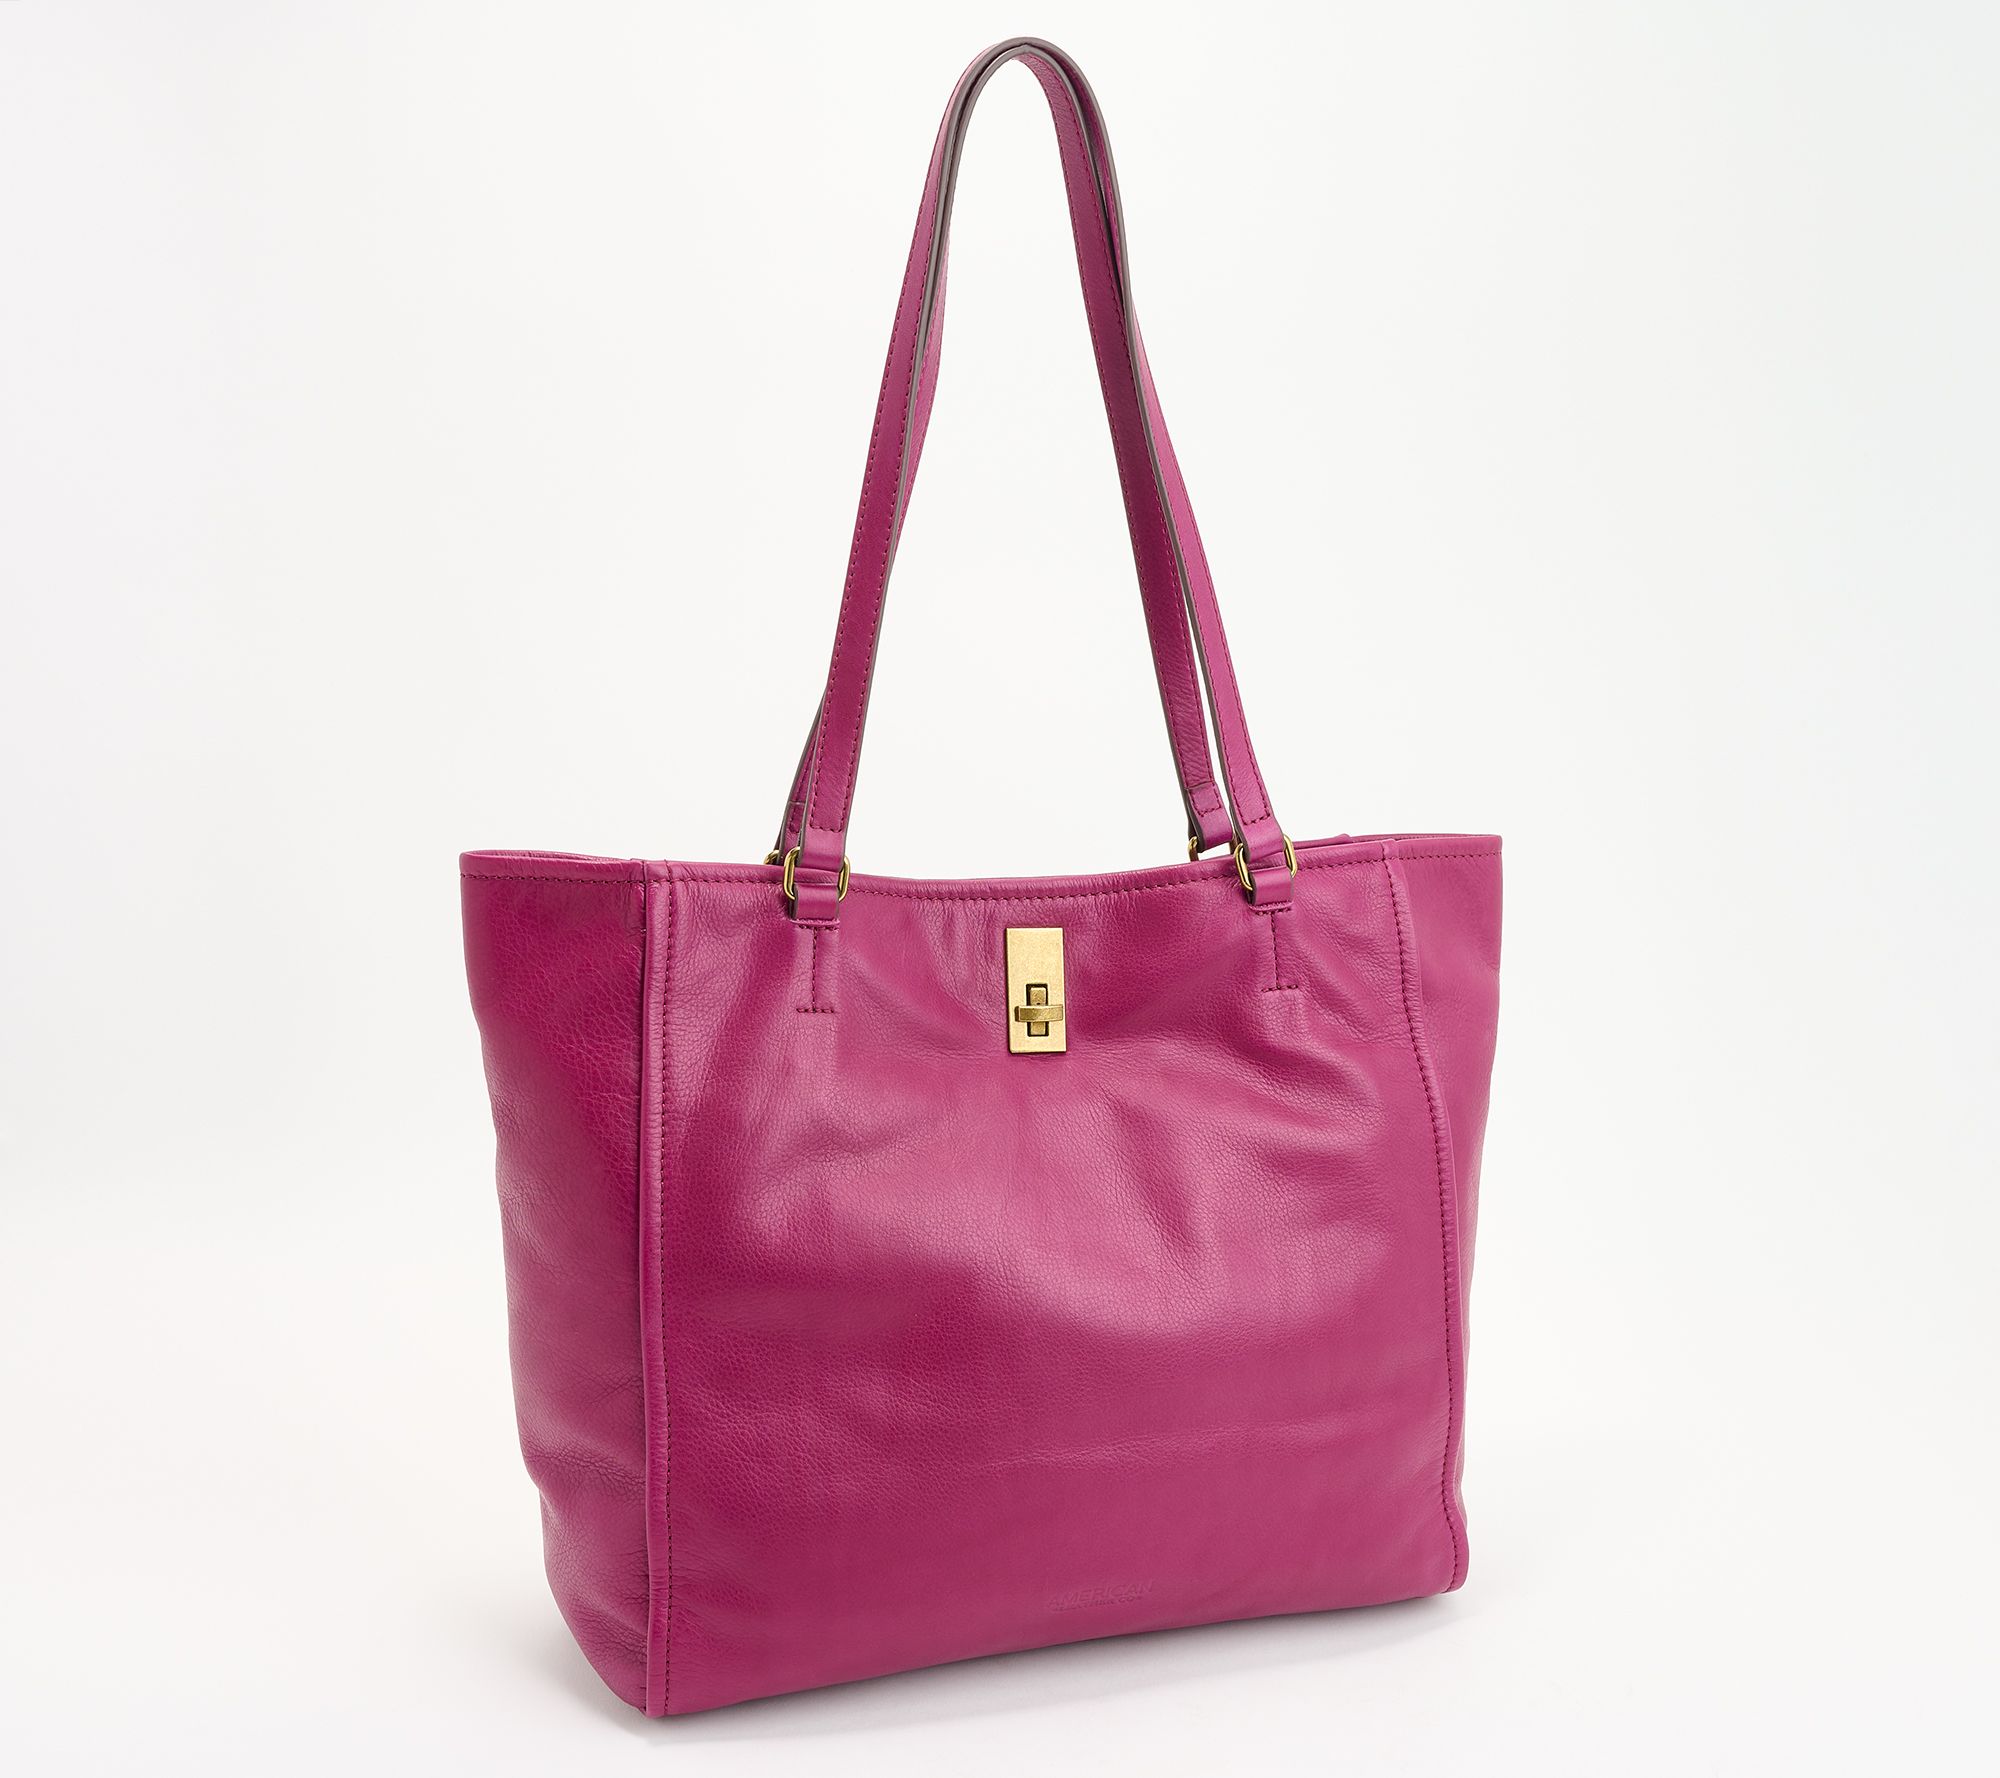 American Leather Co. Carter Tote - QVC.com